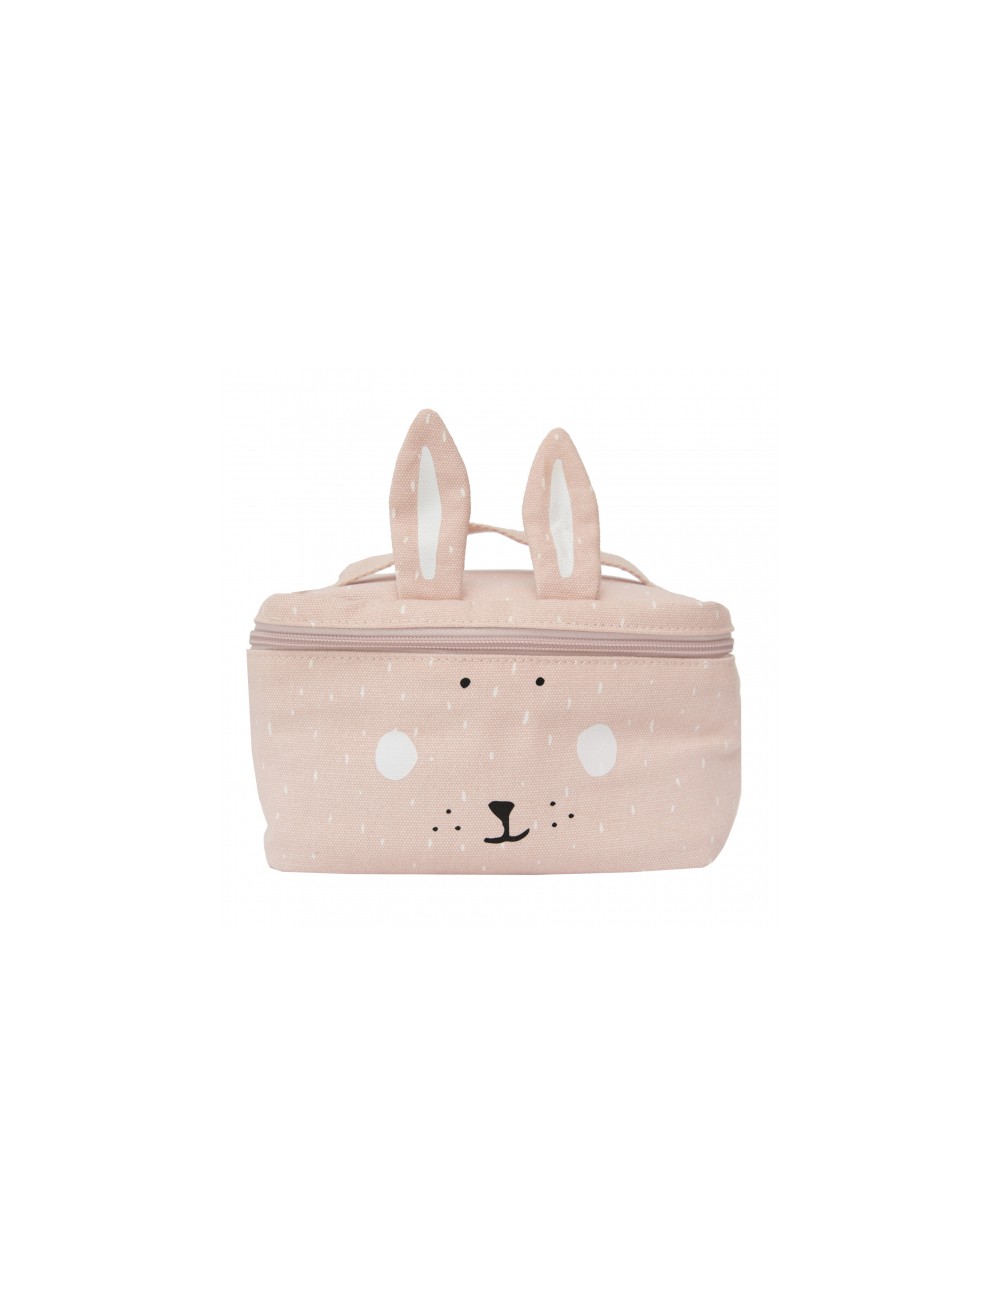 Sac isotherme repas Mr. Fox - Made in Bébé